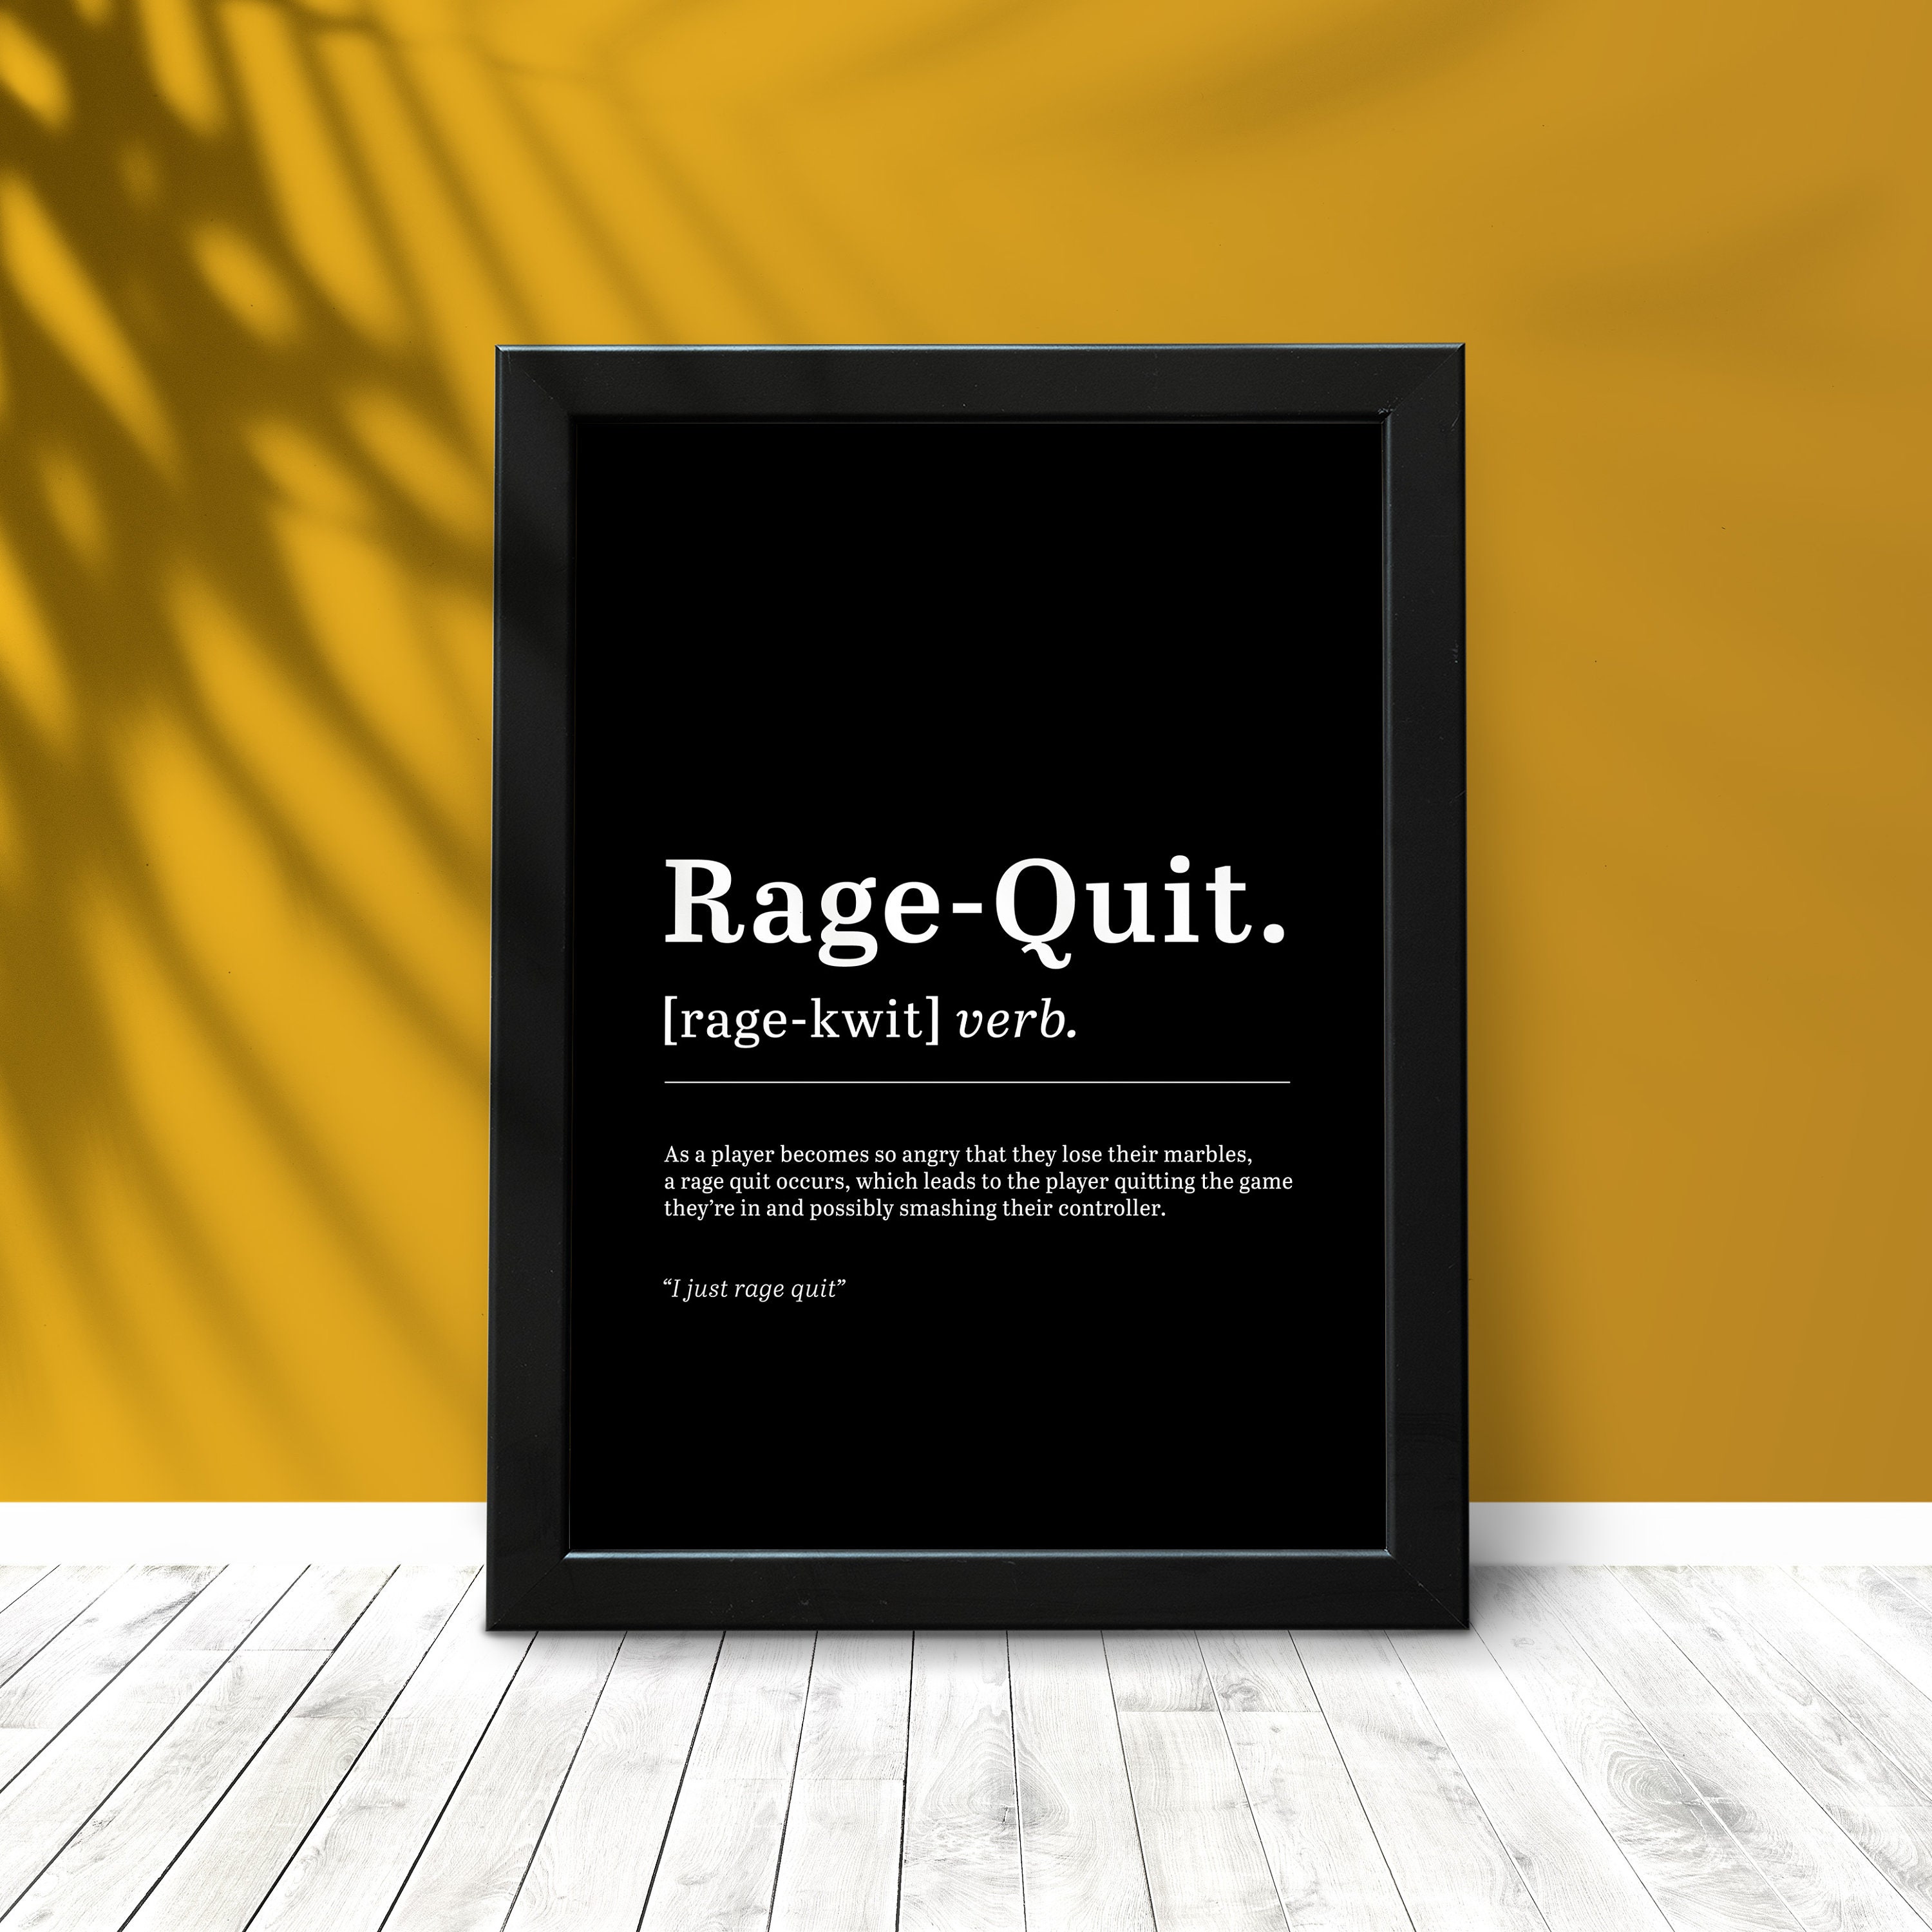 Better Posters: “Rage quit” and poster designs